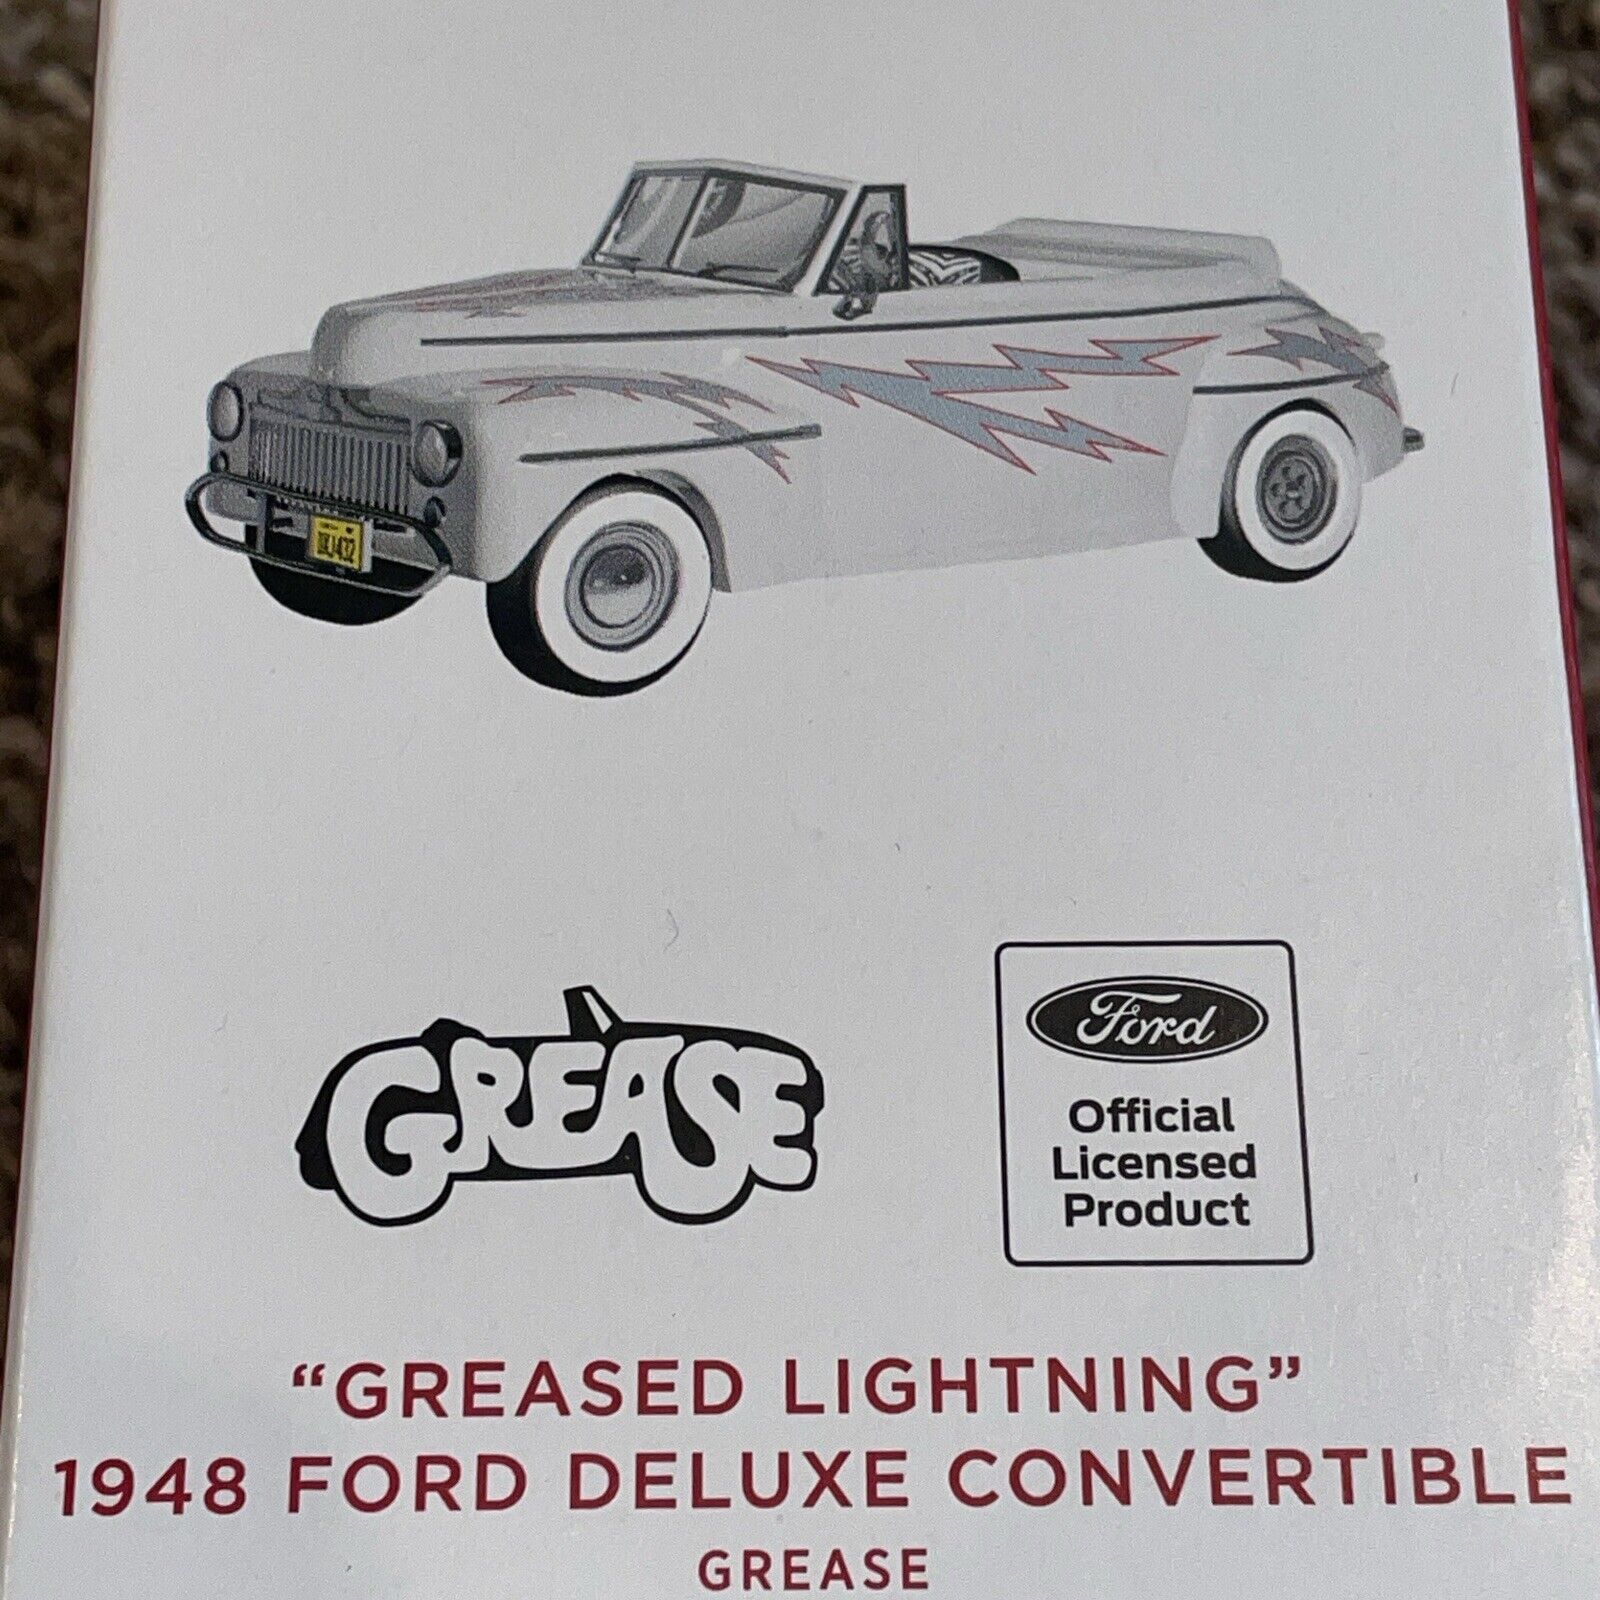 NIB 2022 Hallmark Ornament GREASED LIGHTNING 1948 Ford Deluxe Convertible GREASE